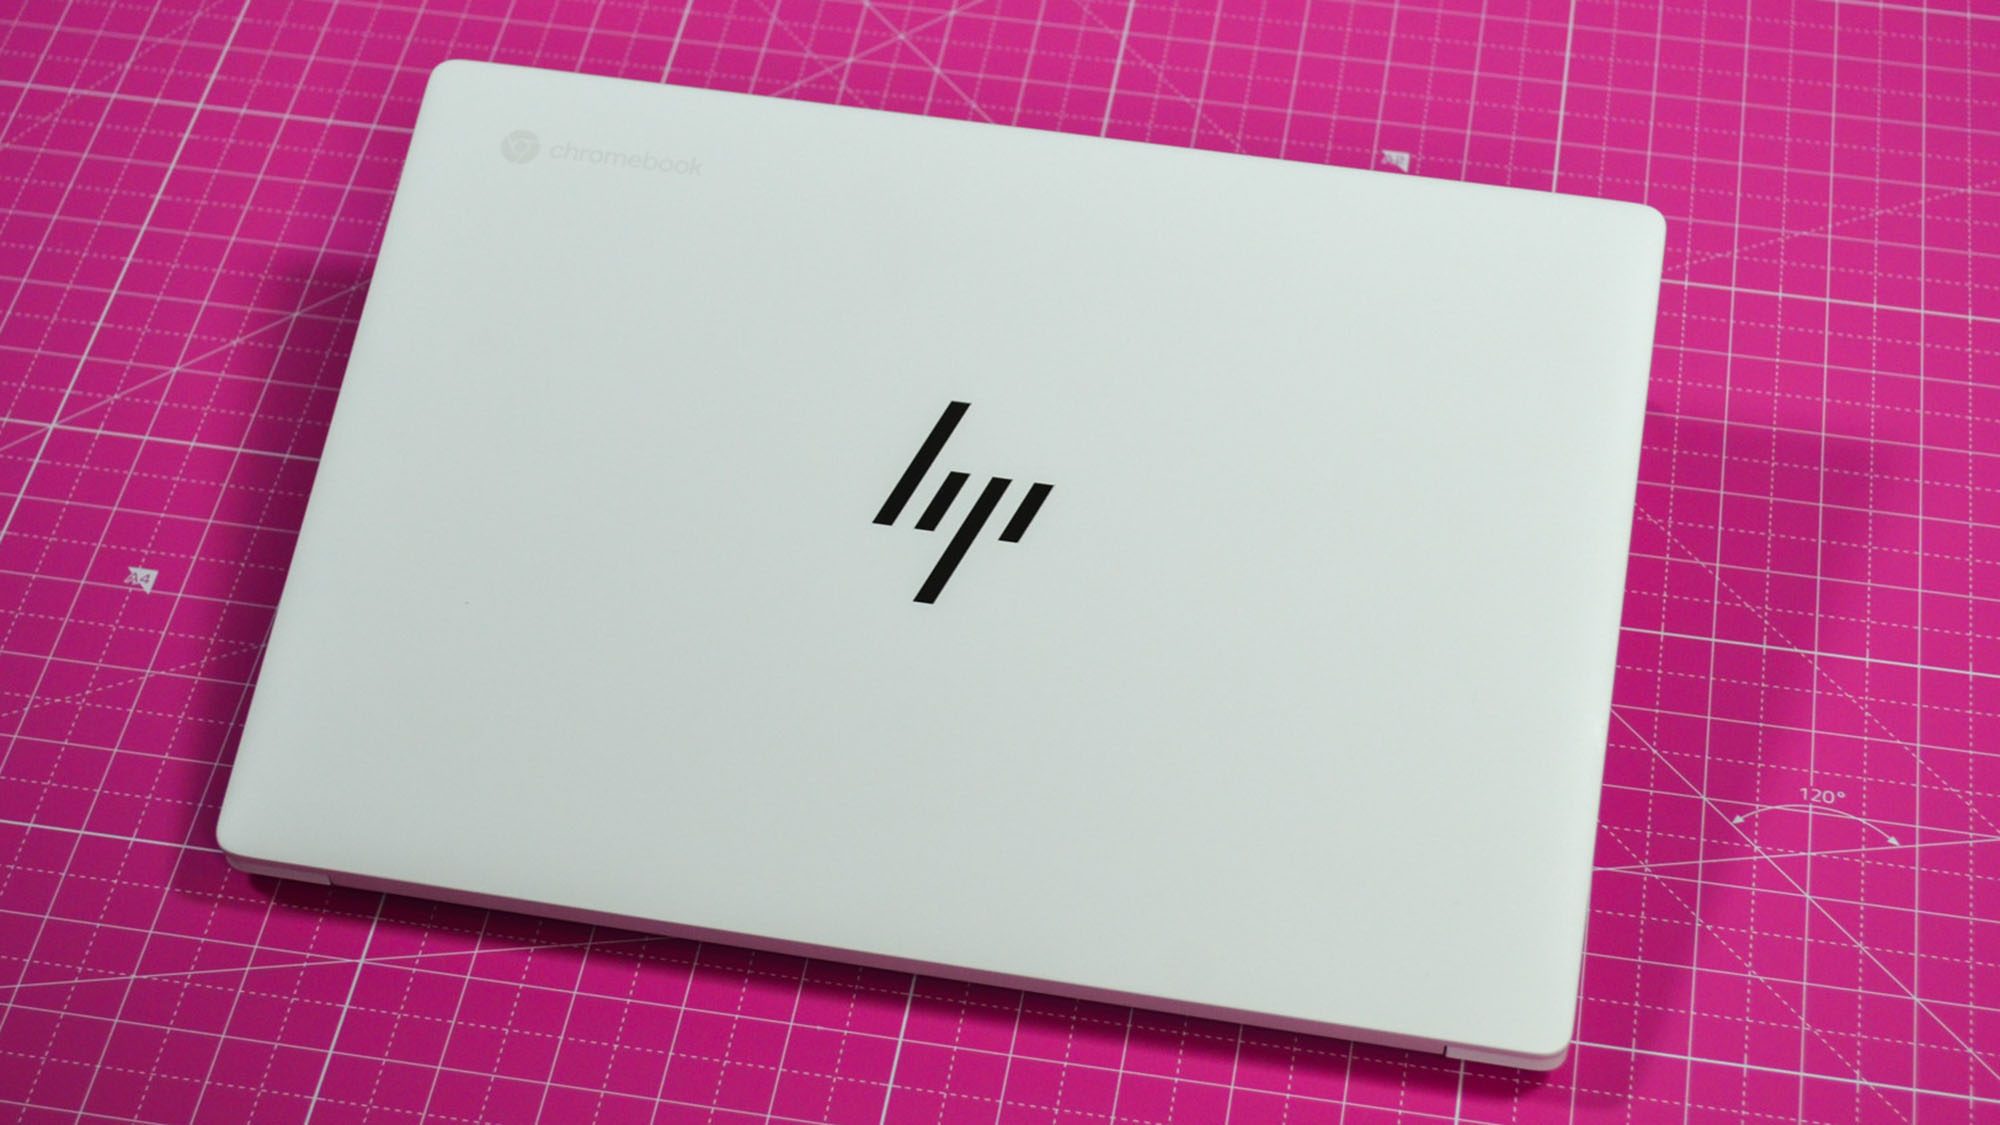 An HP Dragonfly Pro Chromebook on a ruled pink desk mat